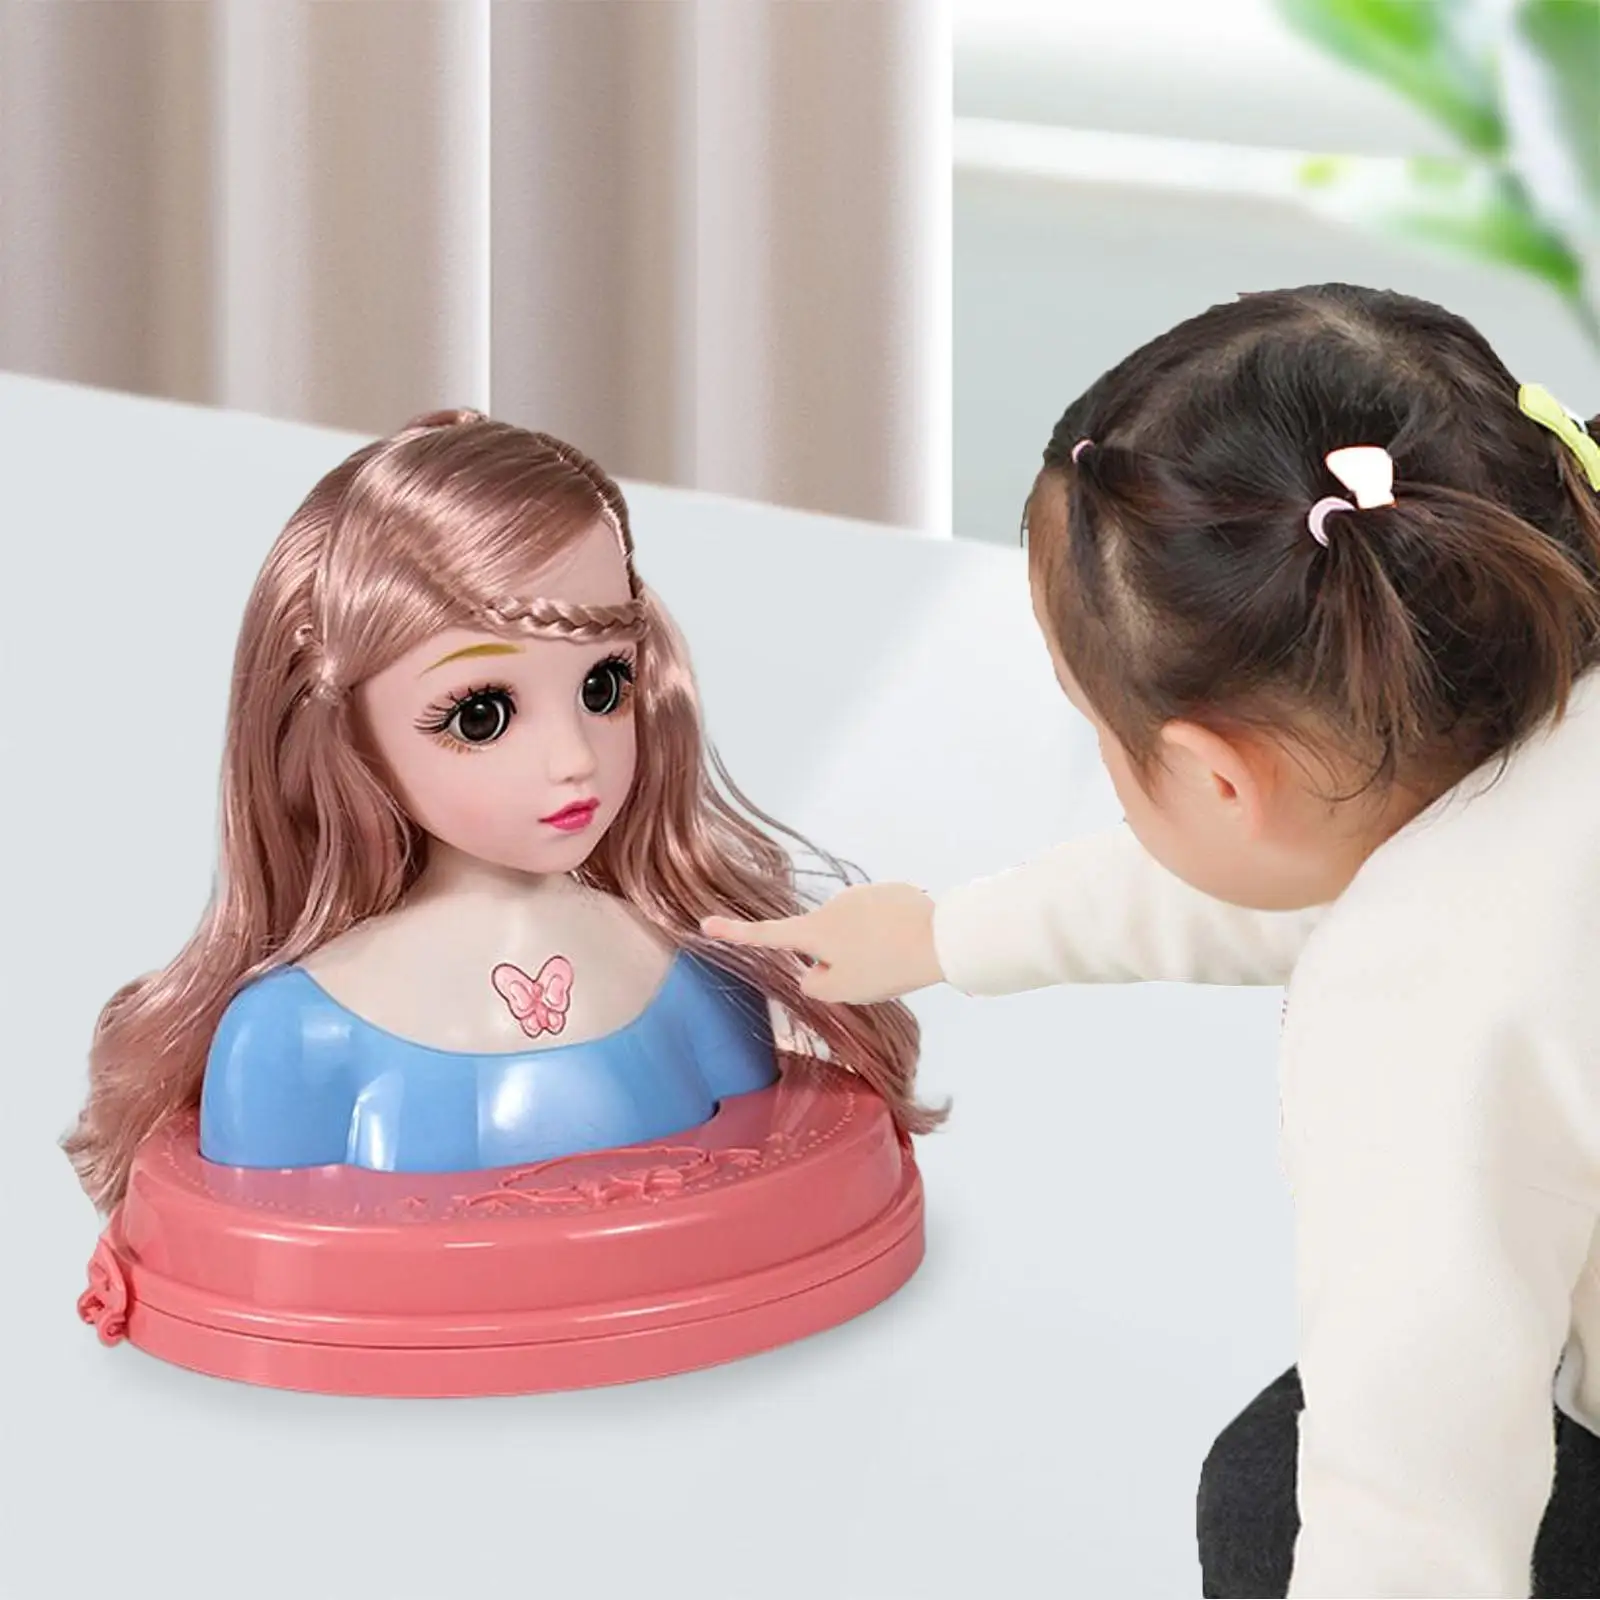 Fashion Doll Styling Head Toy Movable Eyelids Princess Doll Makeup Dolls Playset for Girls Children Kids Birthday Gifts